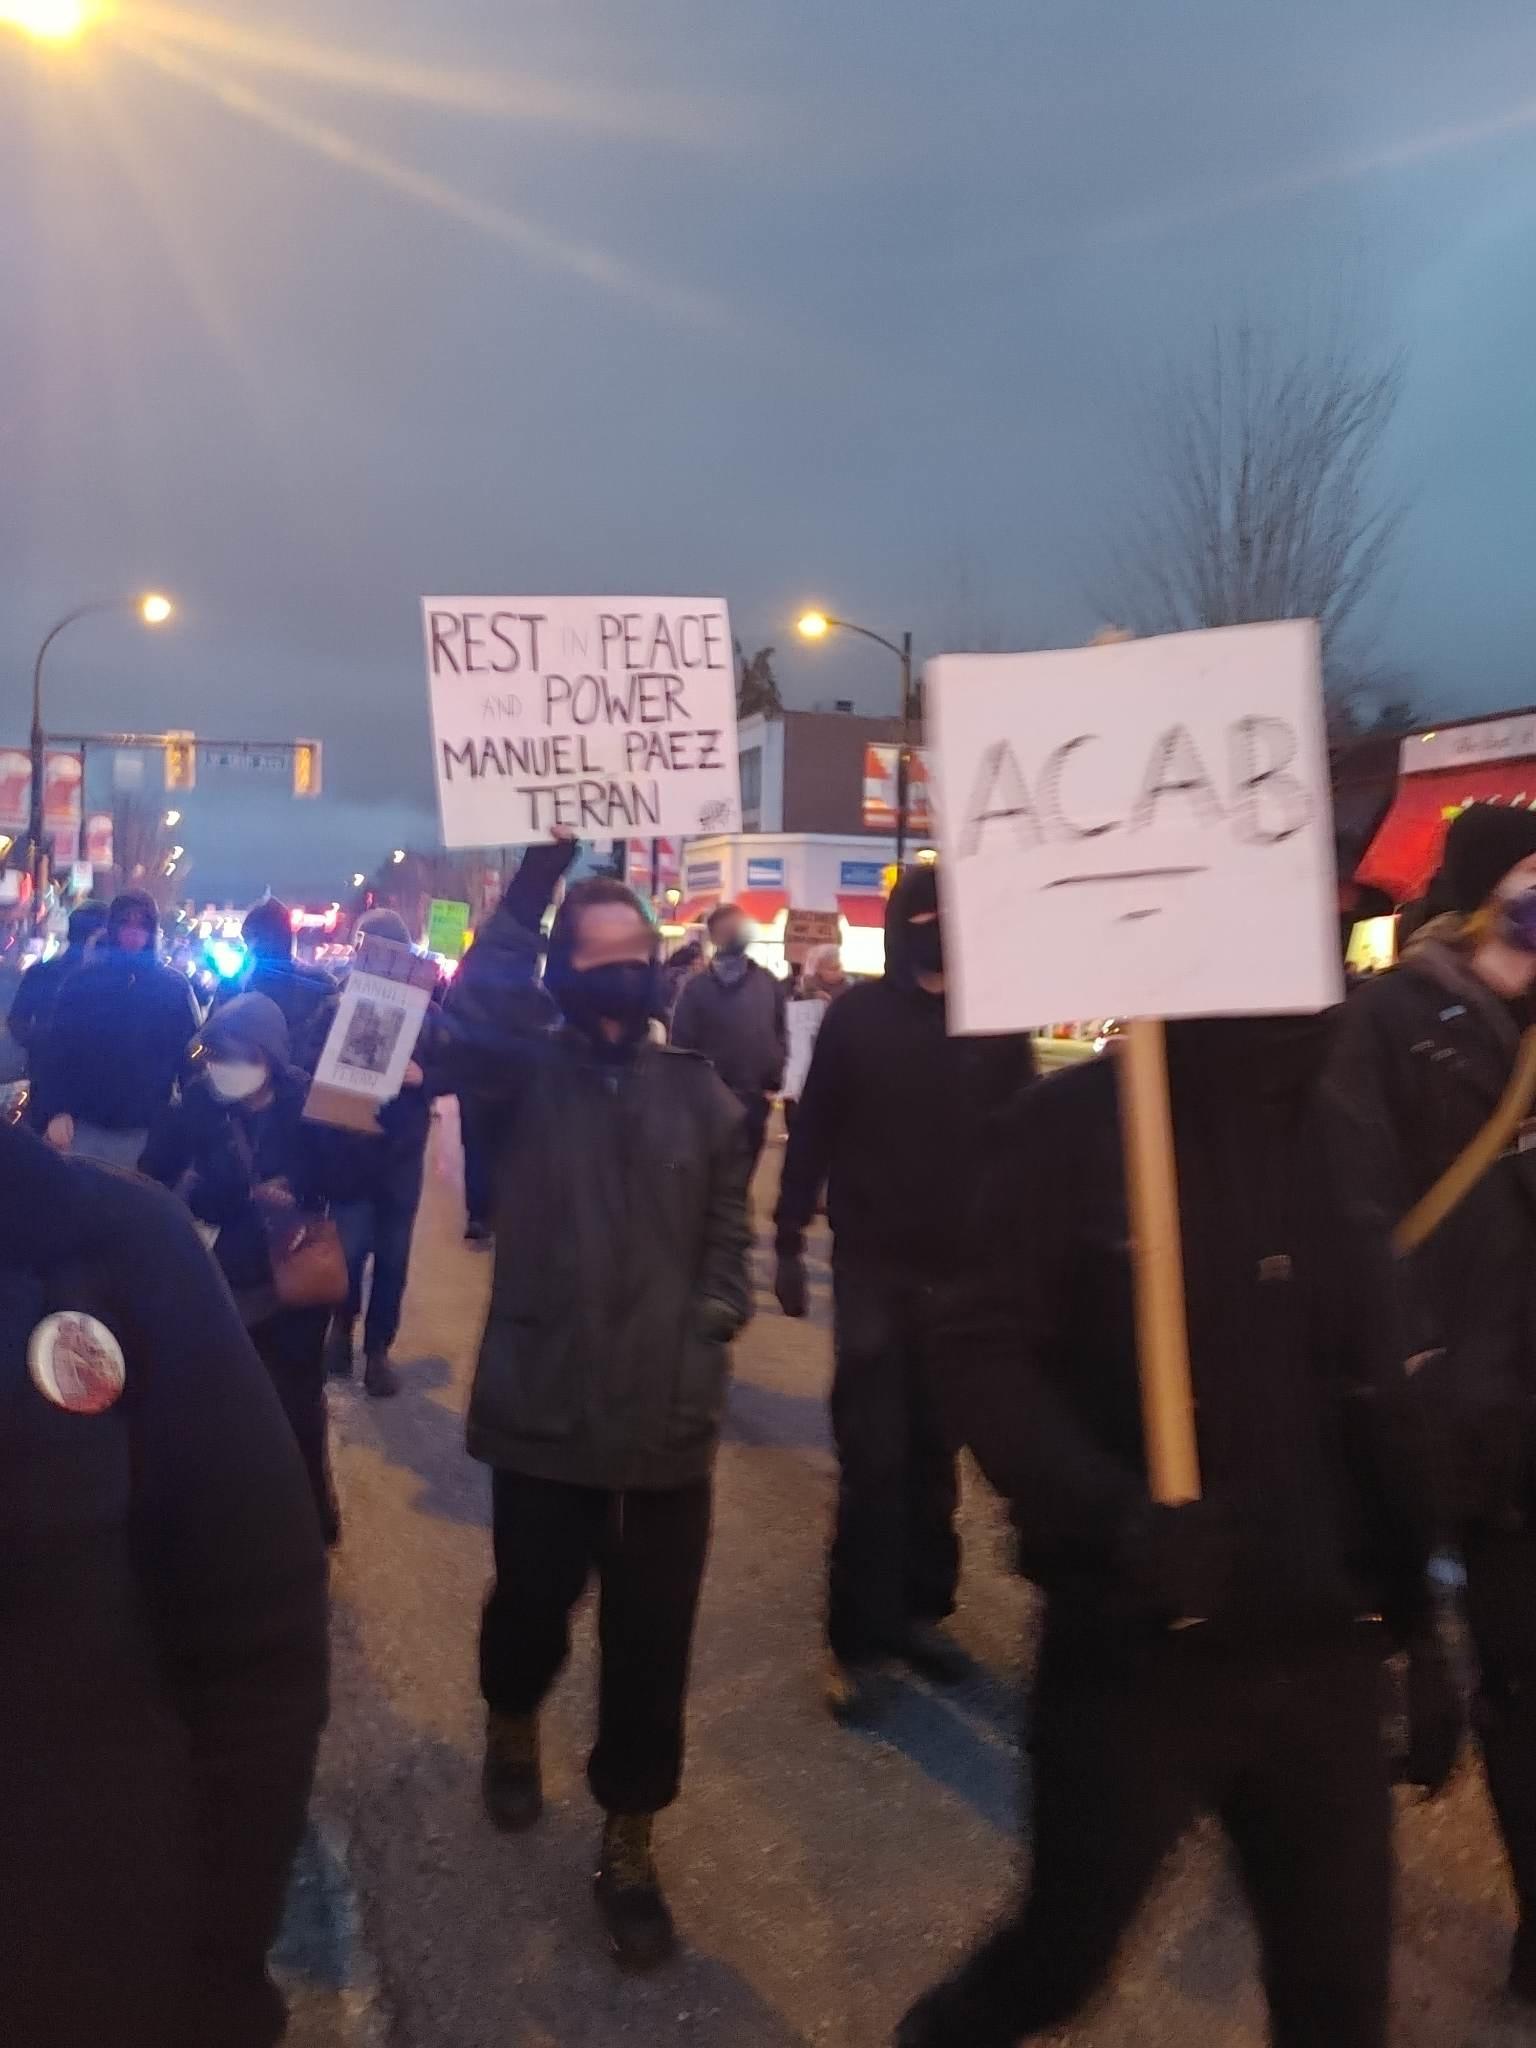 A group of protesters holding signs march on a city street. One sign says "REST IN POWER MANUEL PAEZ TERAN" and another says "ACAB", and is underlined twice. The faces of the protesters are blurred. It is twilight.